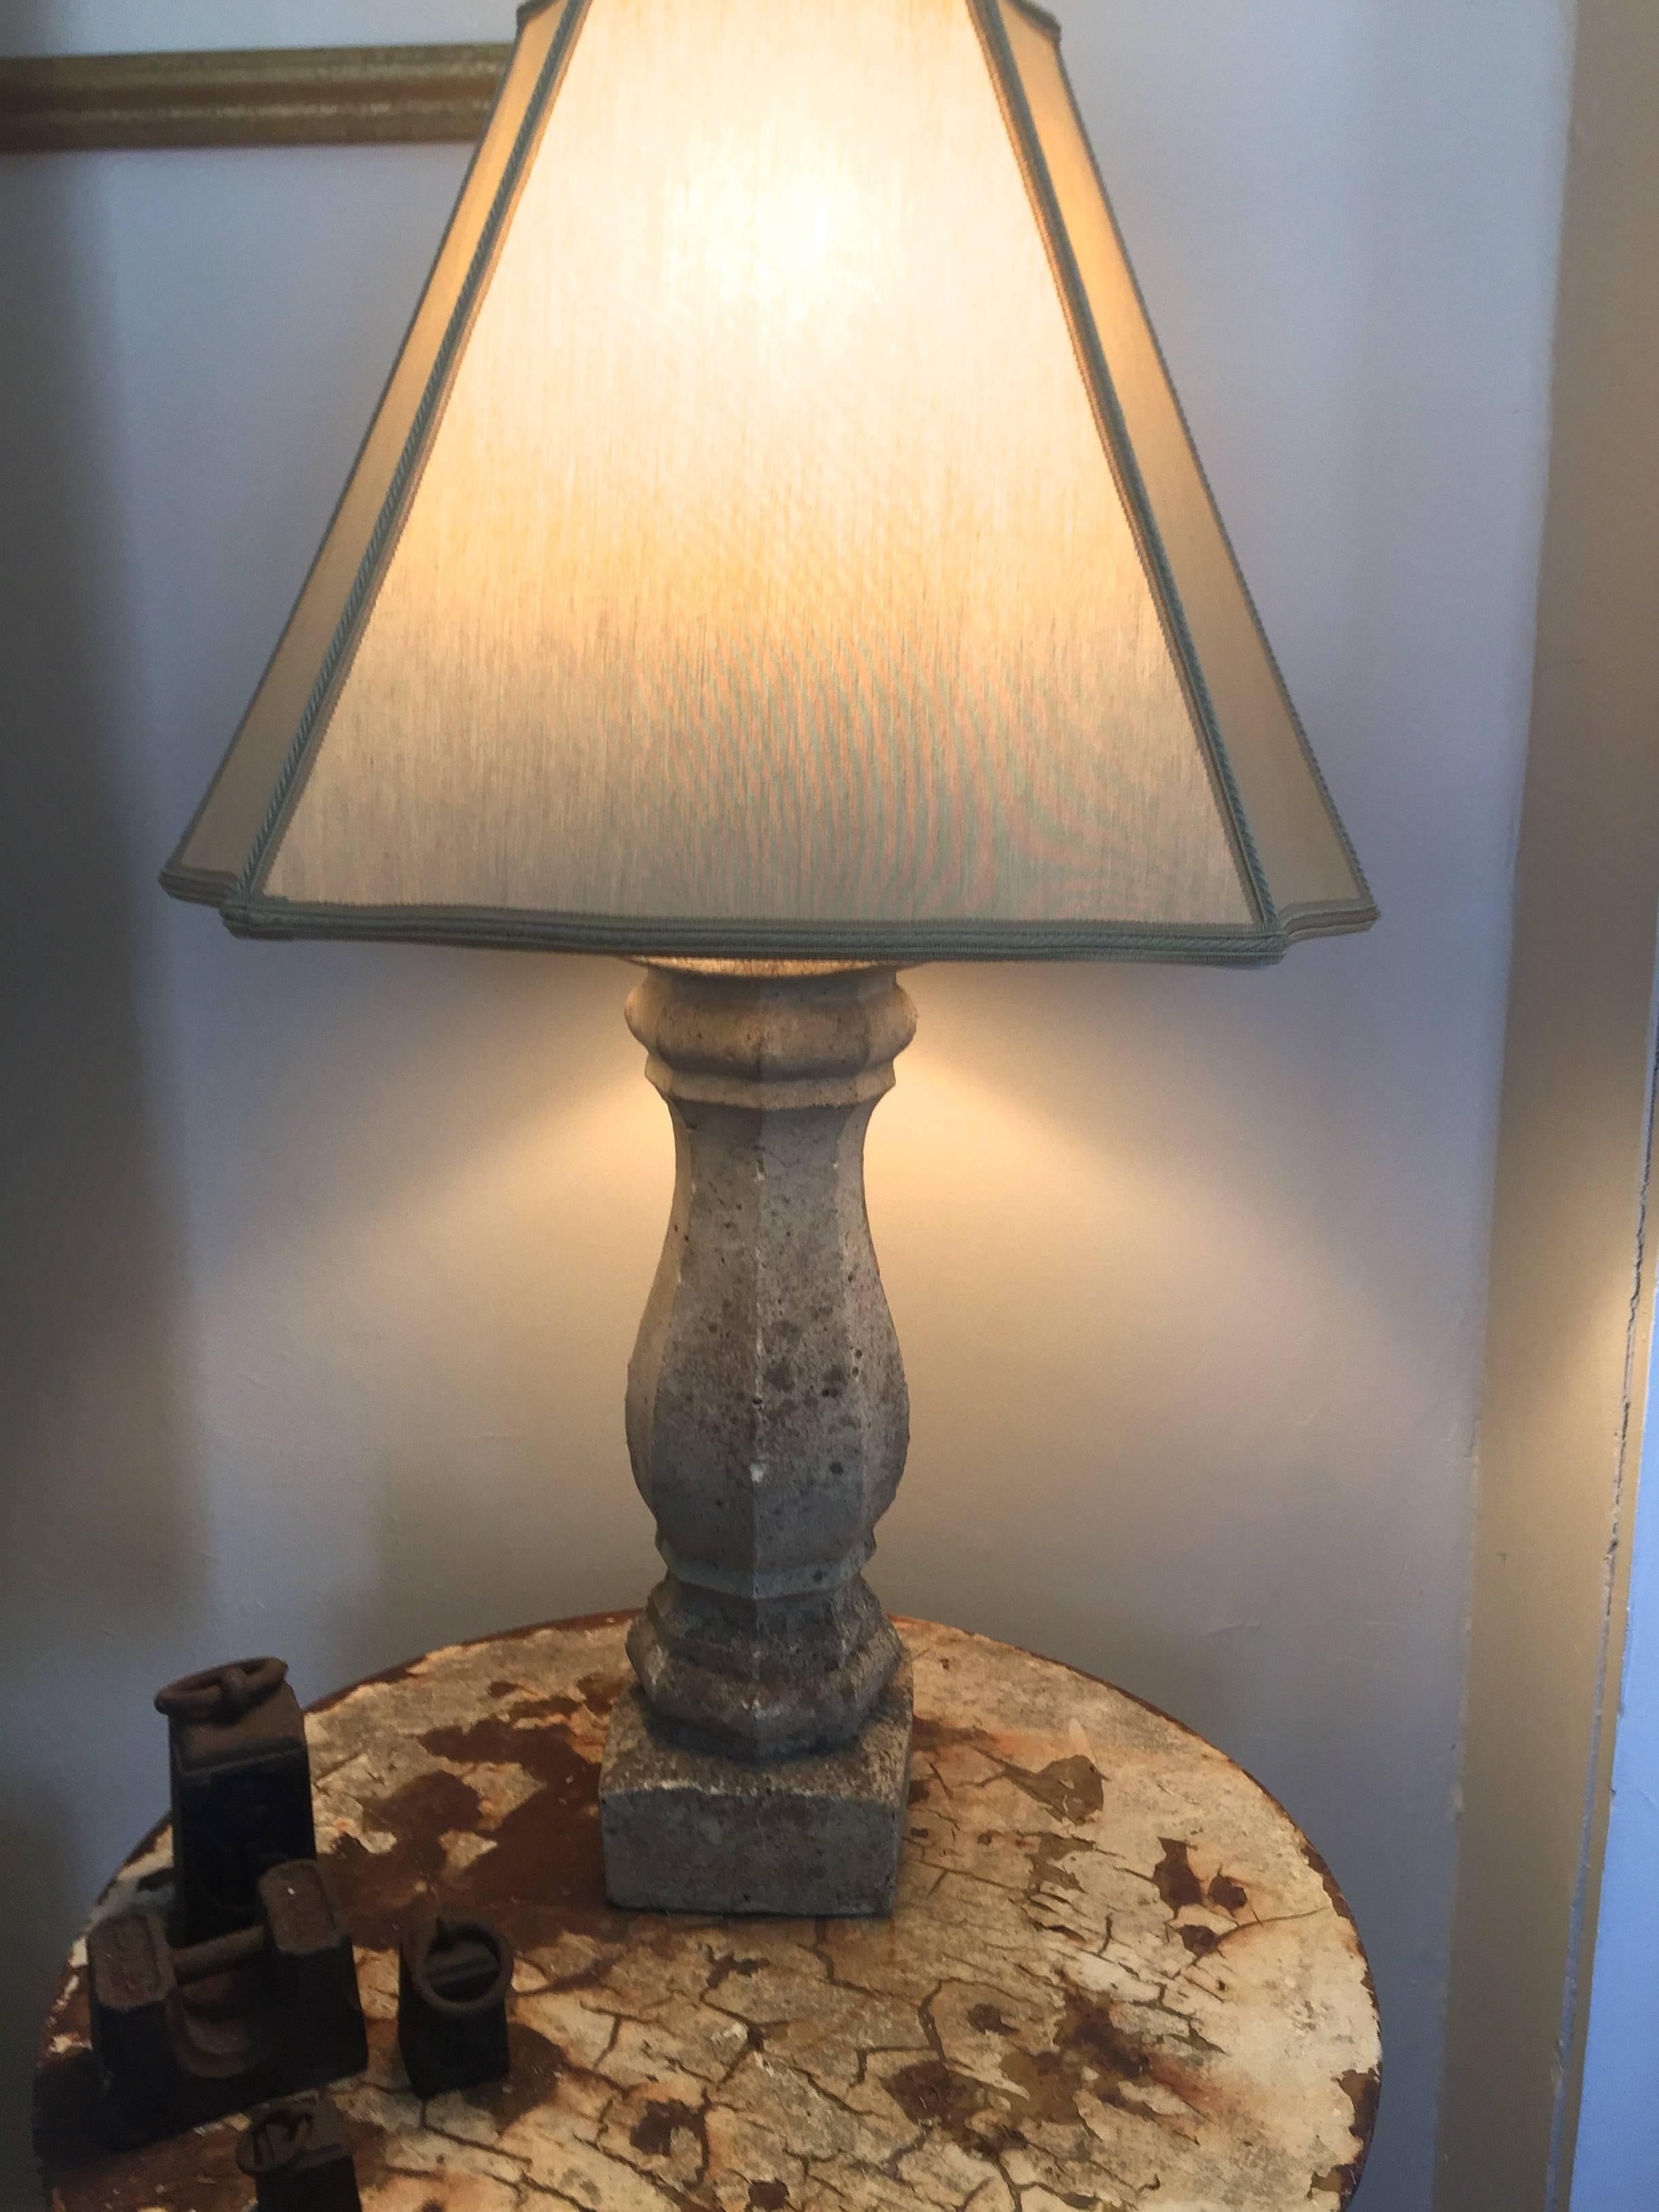 This elegant pair of cast stone lamps has an unusual and very pretty hexagonal baluster form, creamy color, and the heavily-weathered surface belies their age. Topped with cream color washable silk-like shades, the lamps are very versatile and work